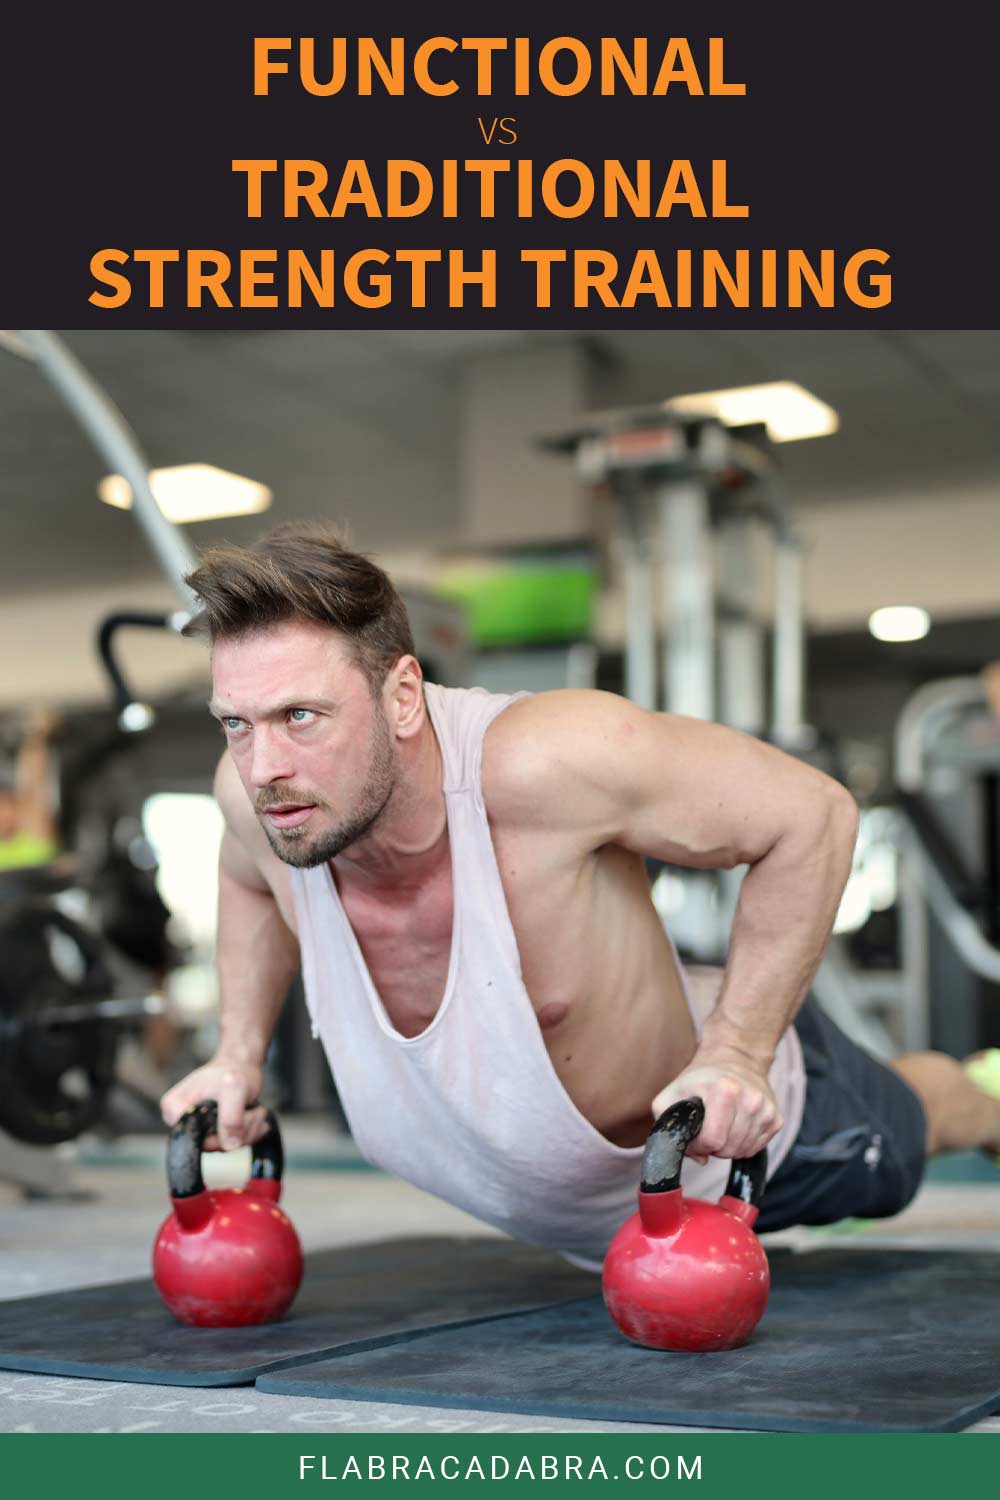 Functional vs. Traditional Strength Training